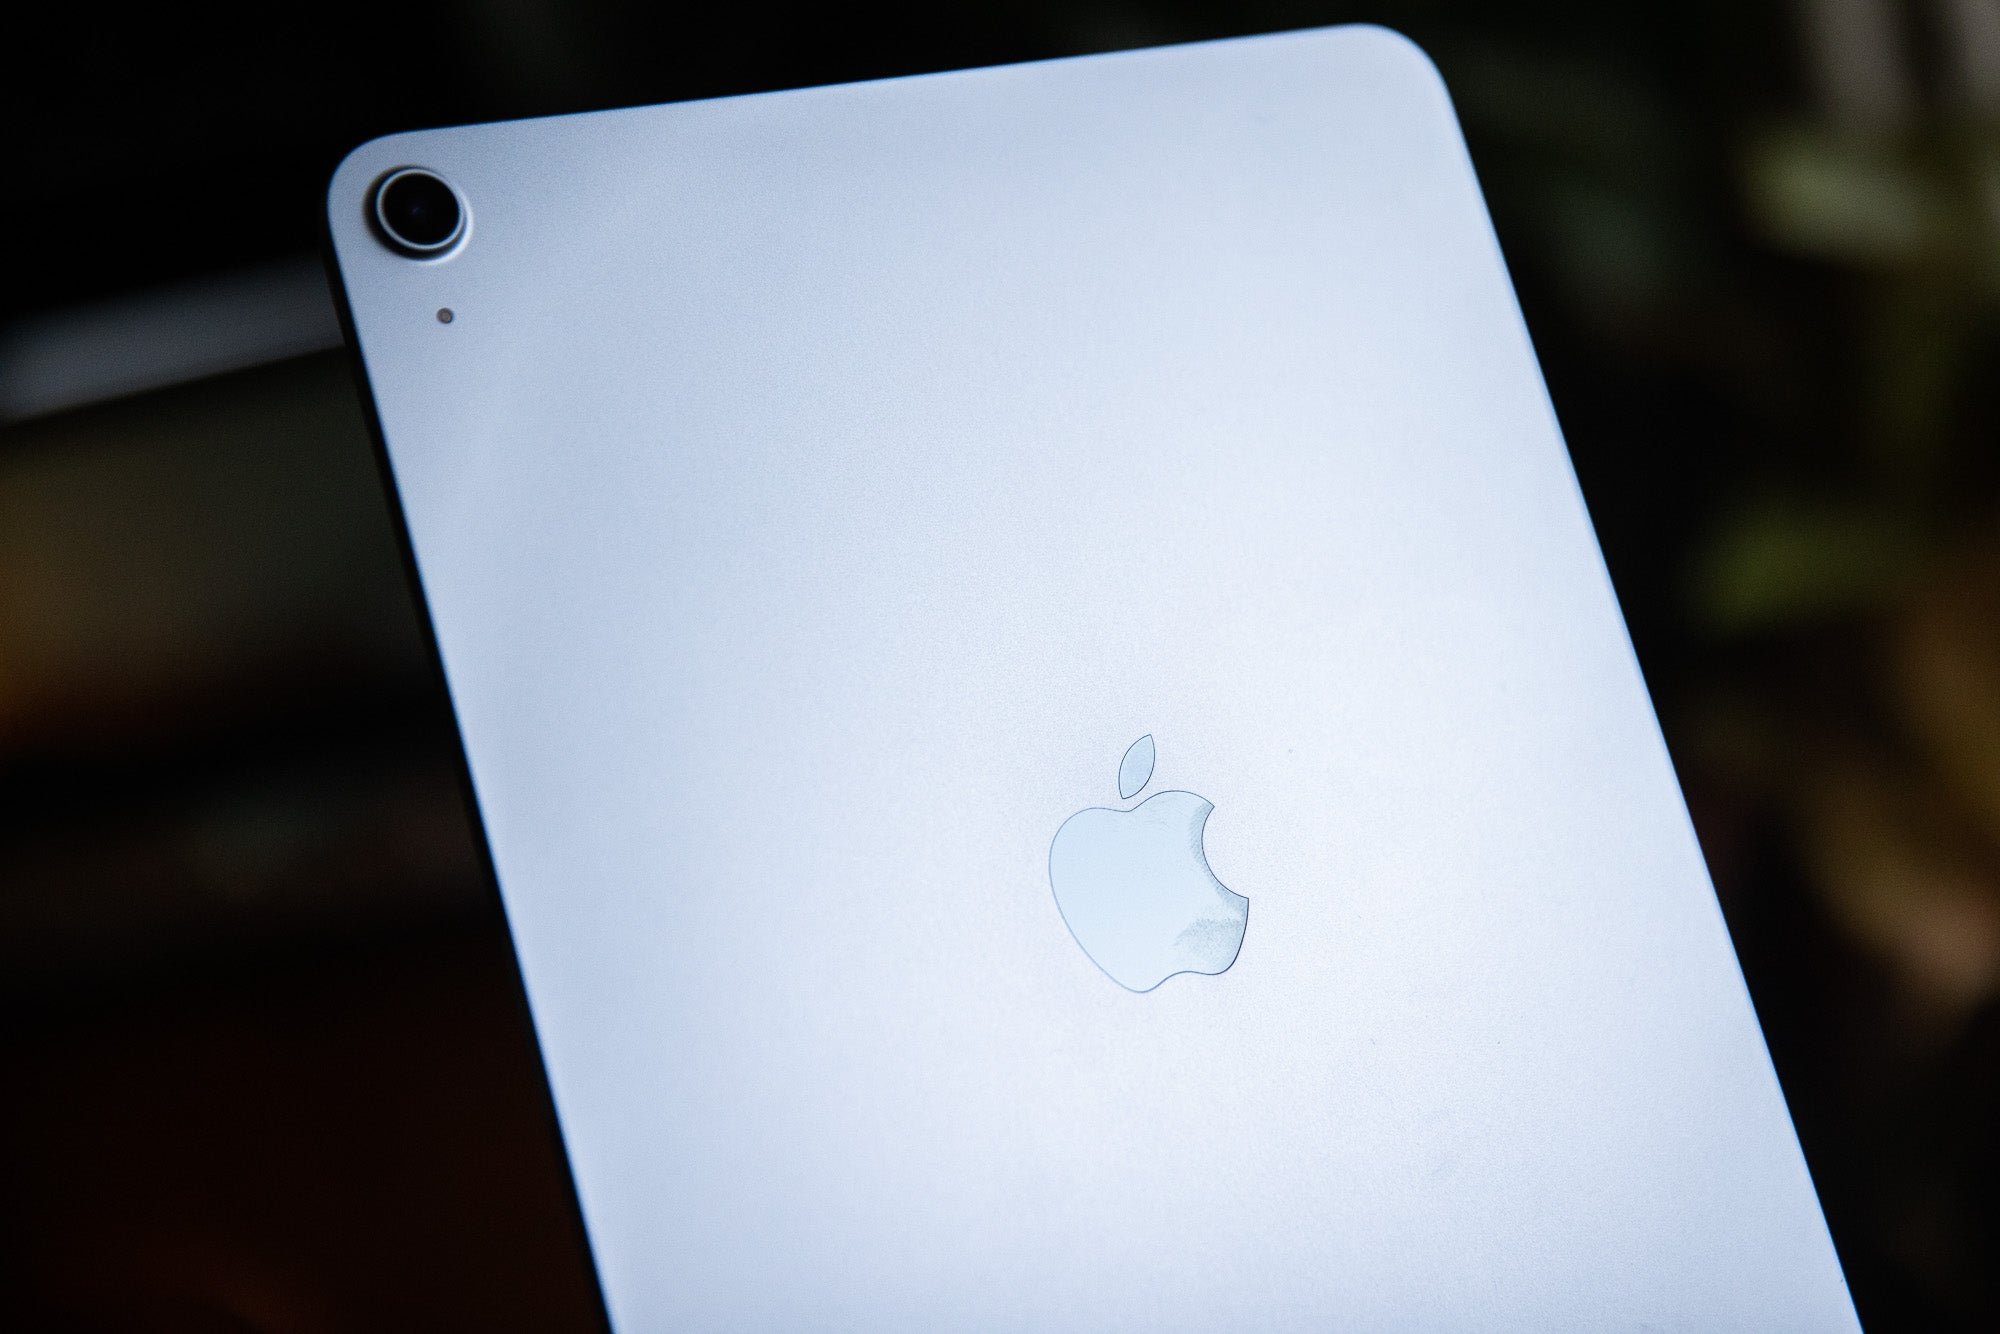 Go update your Apple gadgets right now to avoid this new security vulnerability